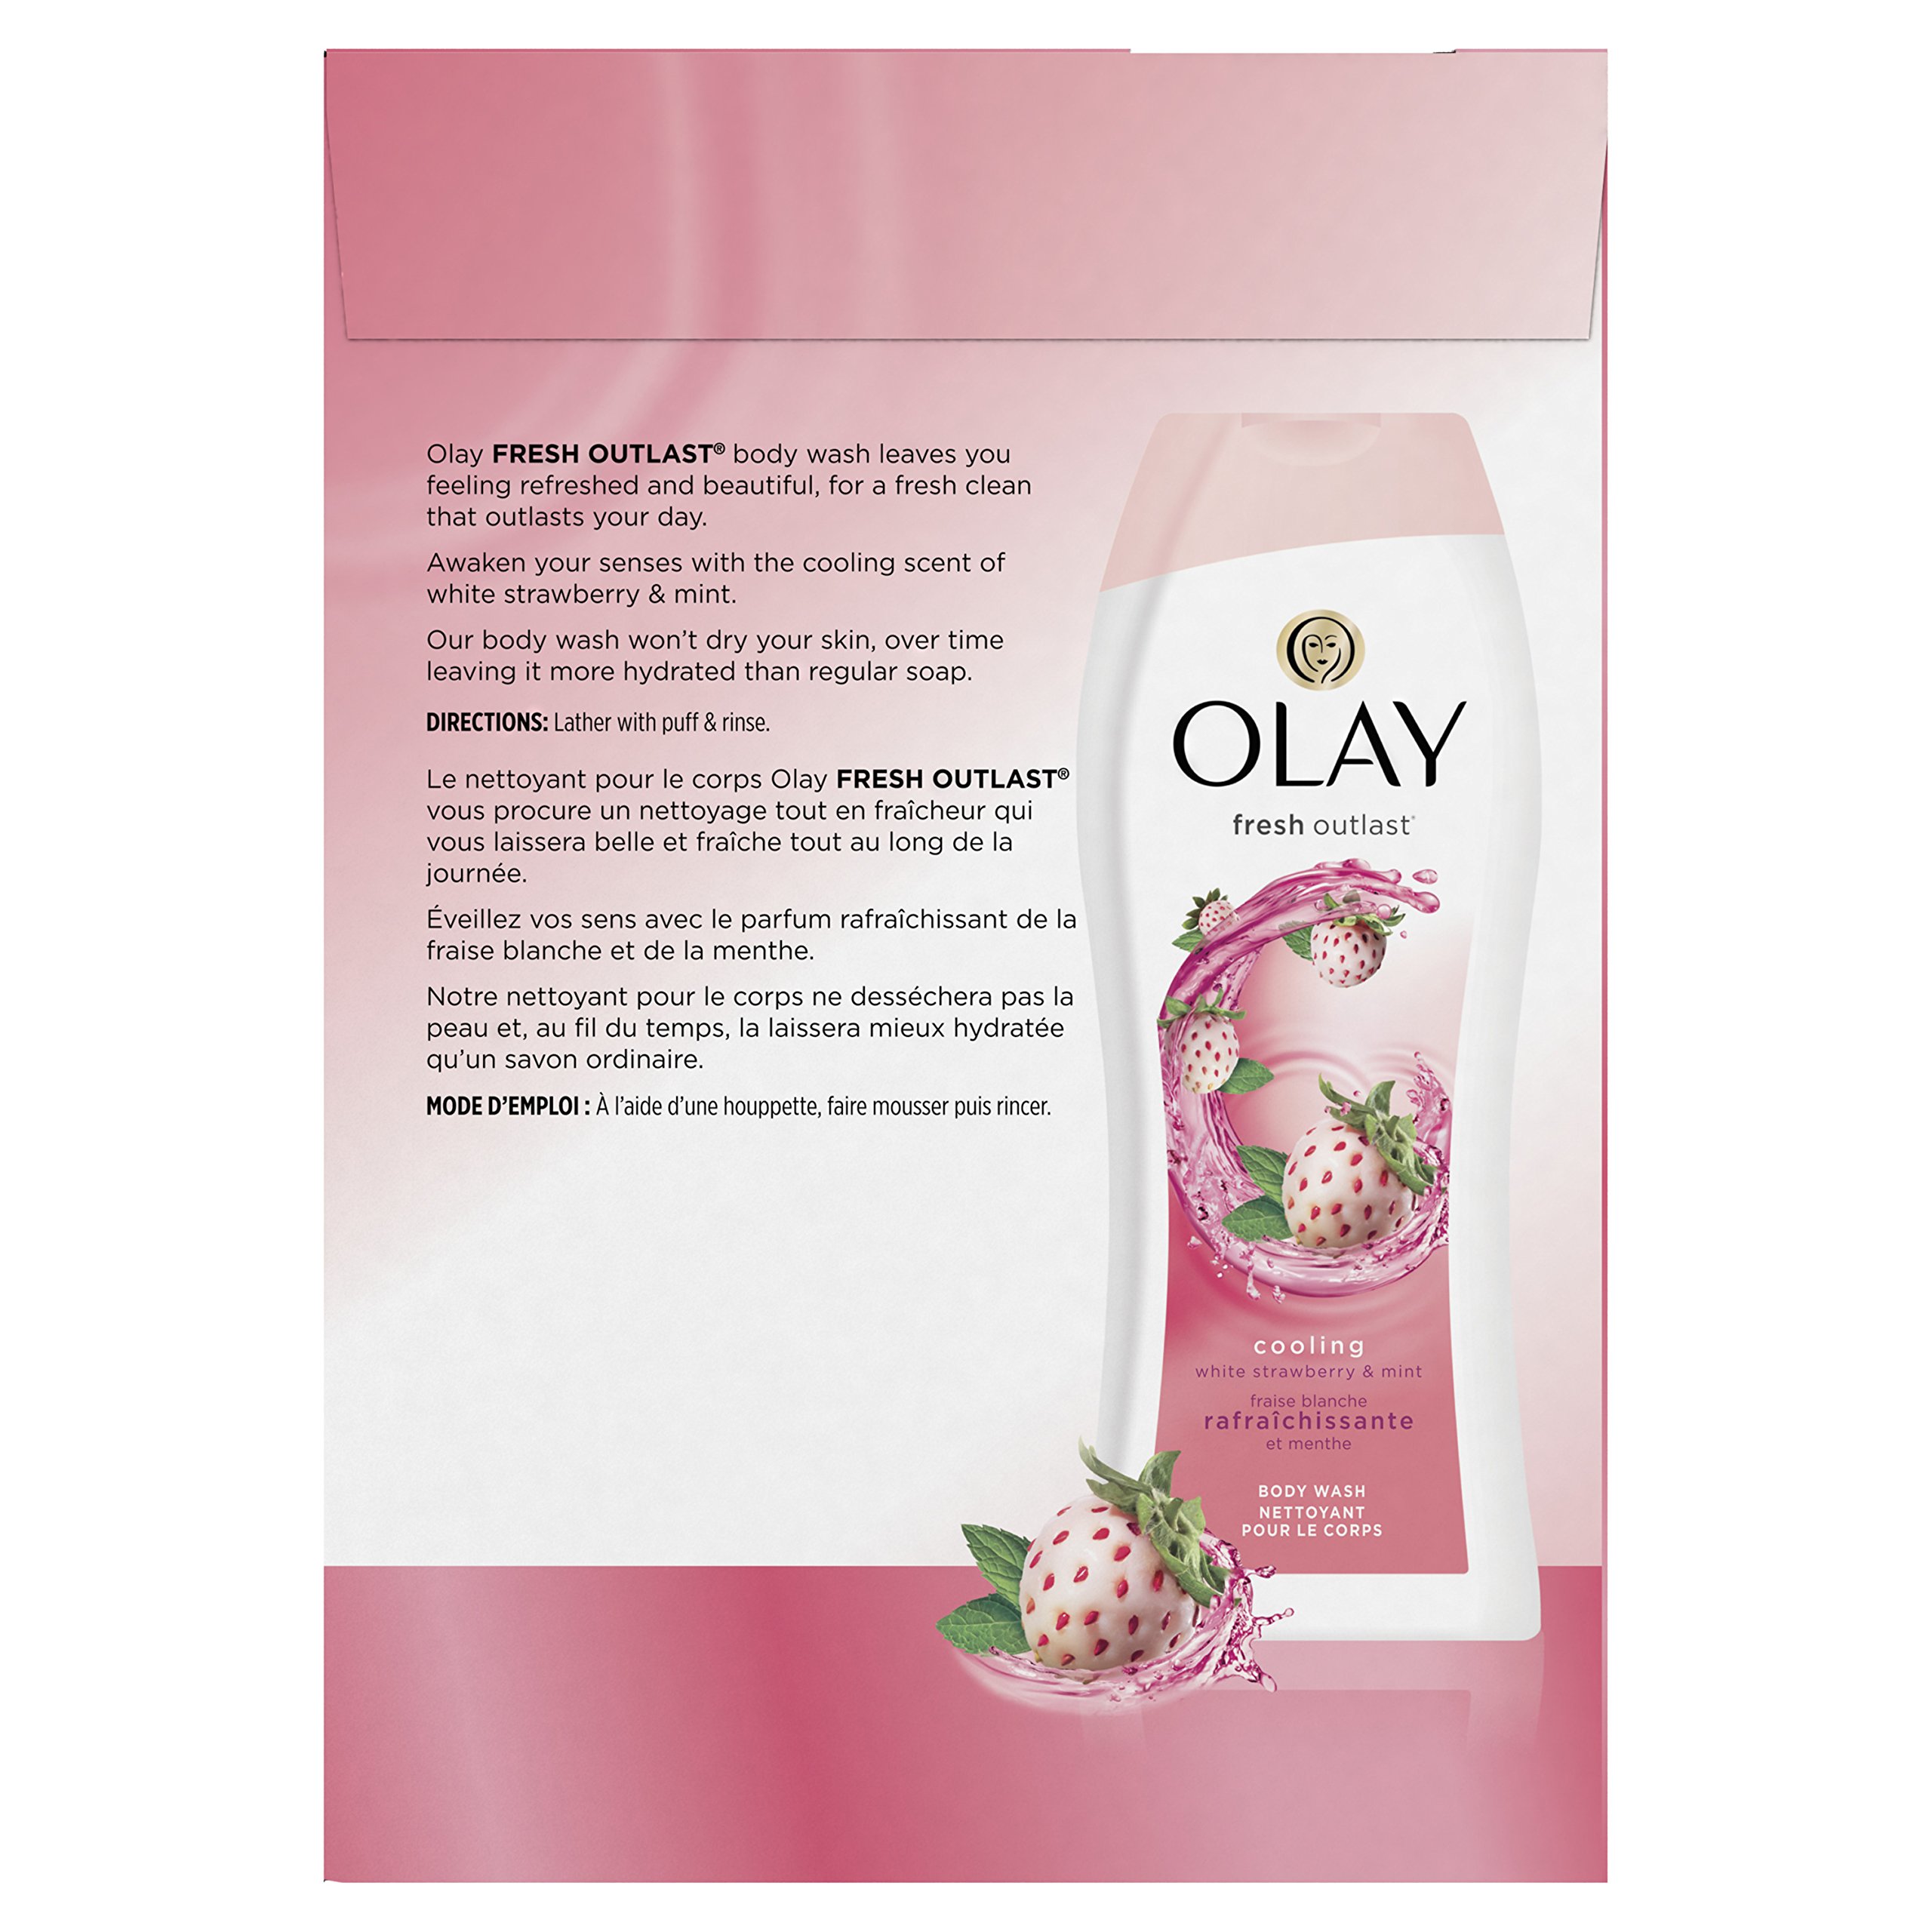 Olay Fresh Outlast Cooling White Strawberry & Mint Body Wash, 16 Fl Oz Twin Pack